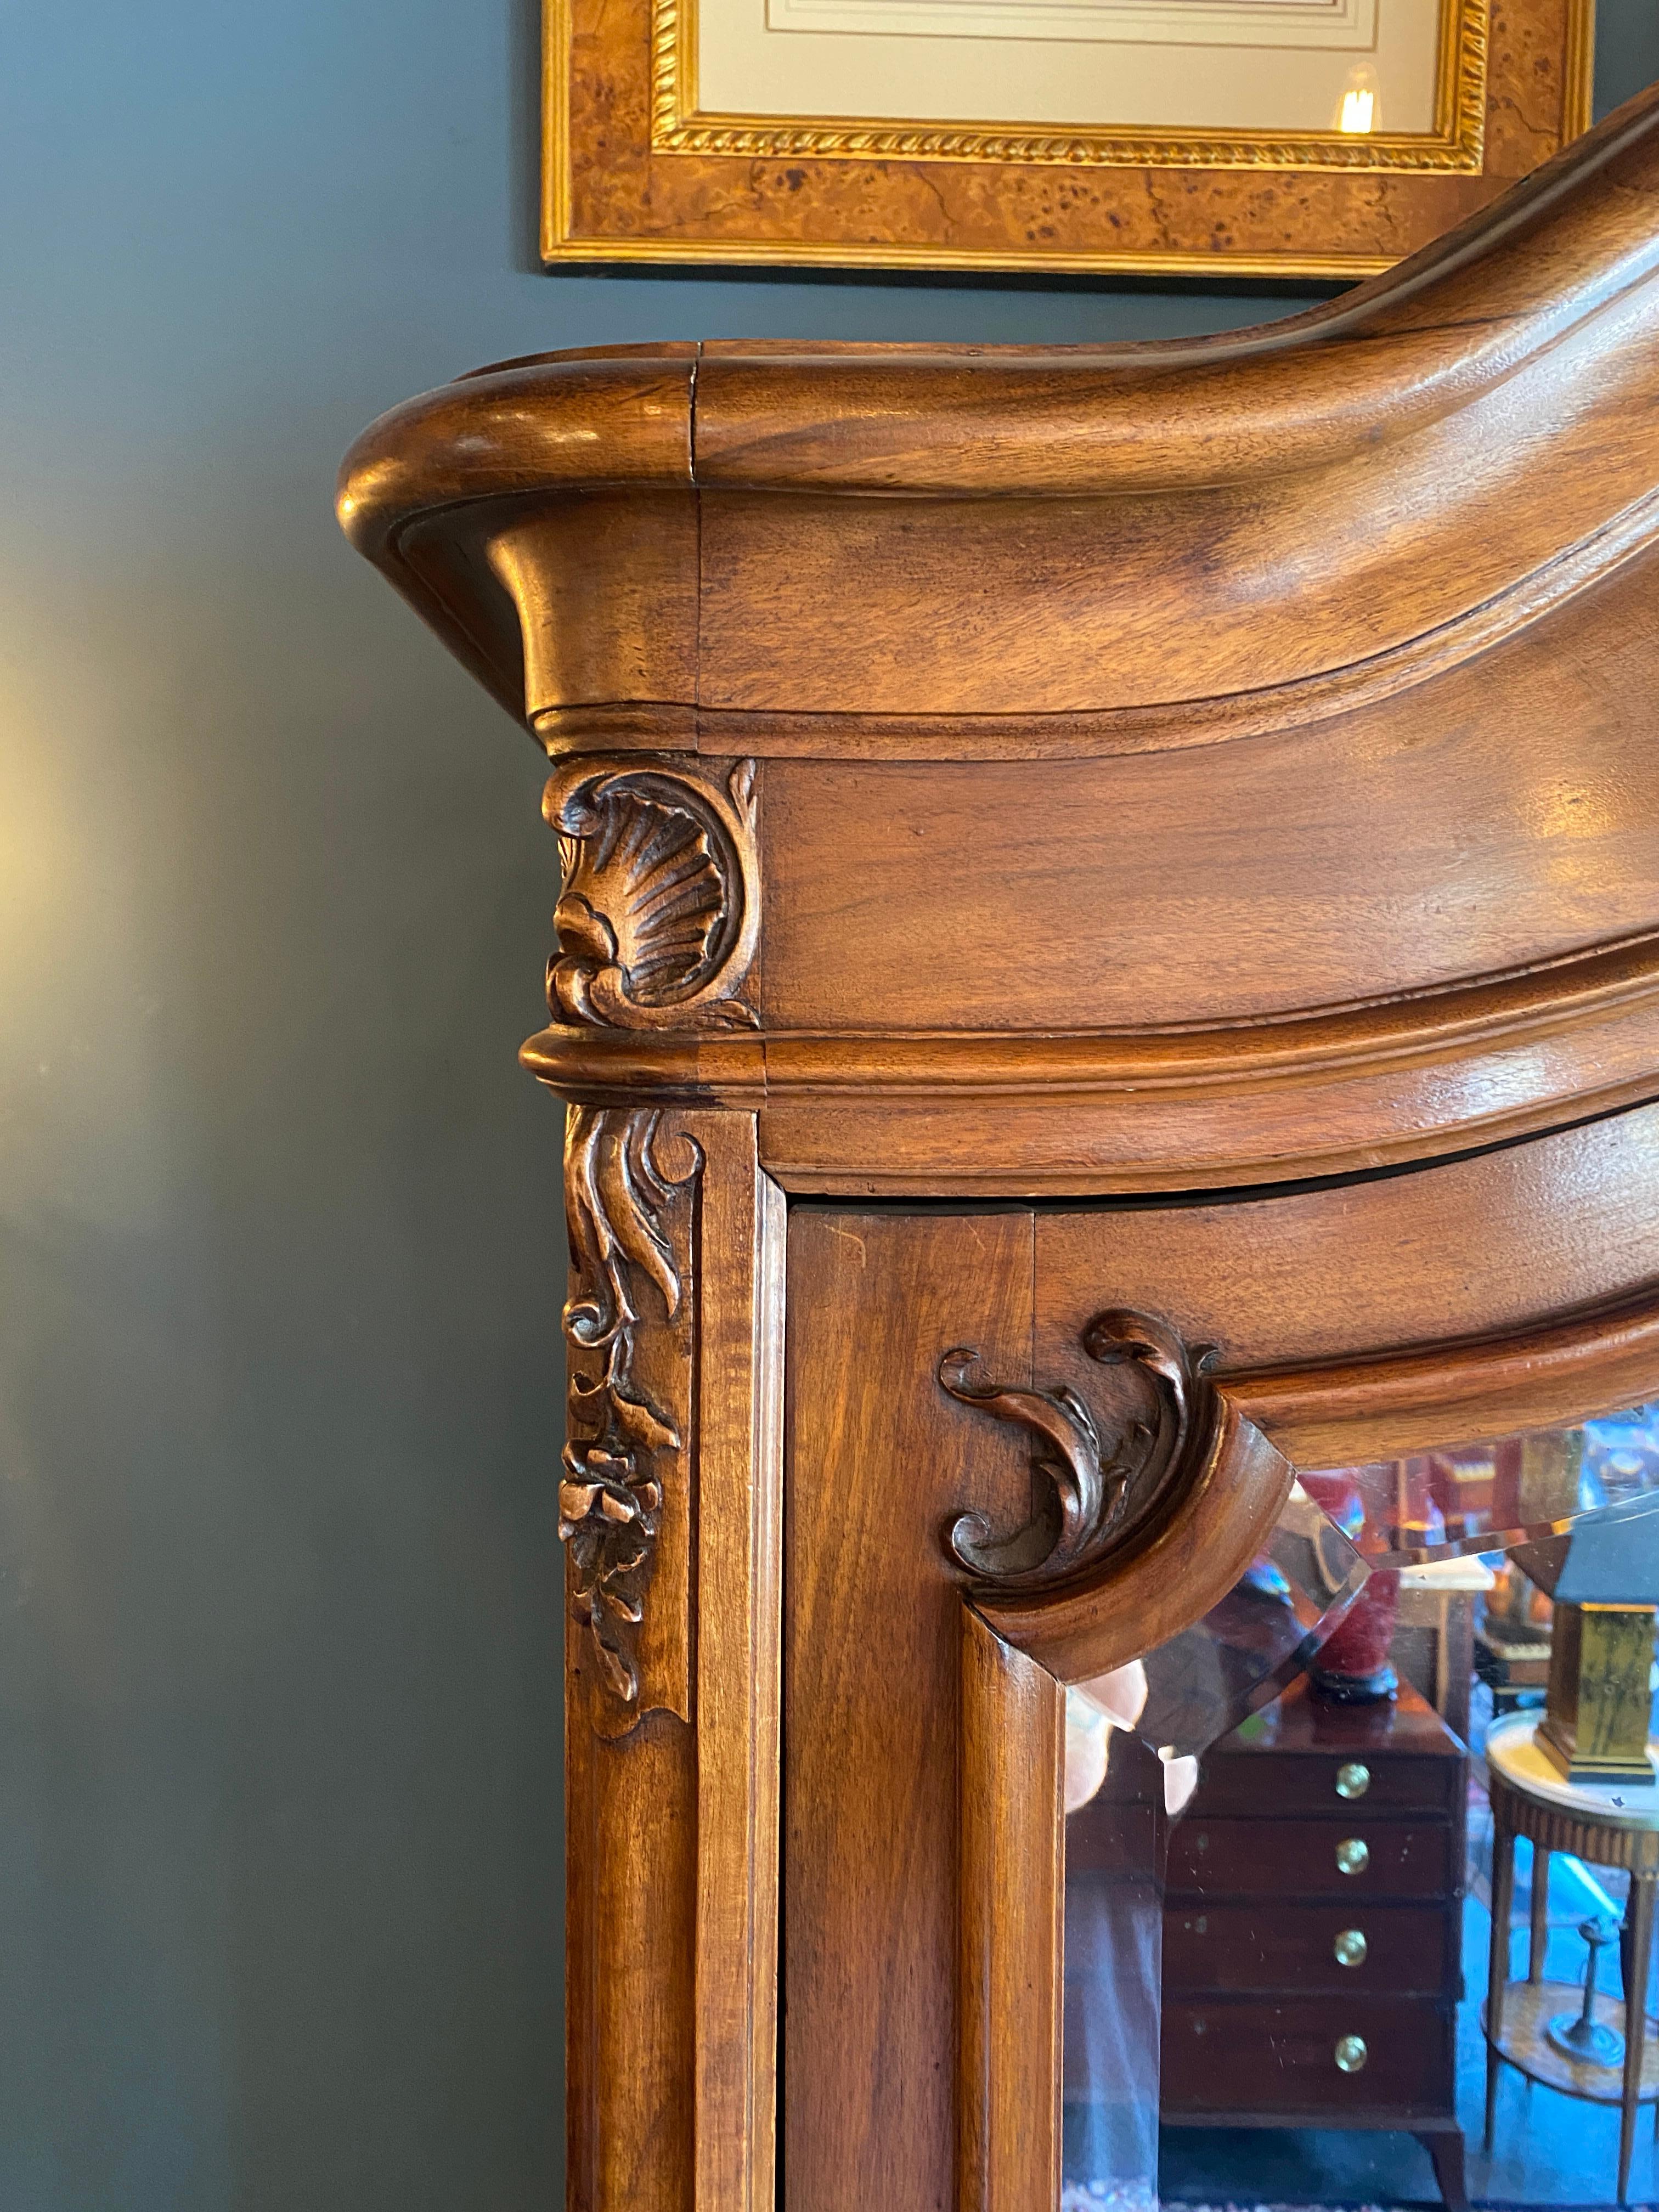 French Louis XV style walnut armoire, three part cabinet resting upon relief carved base with cabriolet legs. Interior Birdseye maple drawers and oak shelving. Large 1